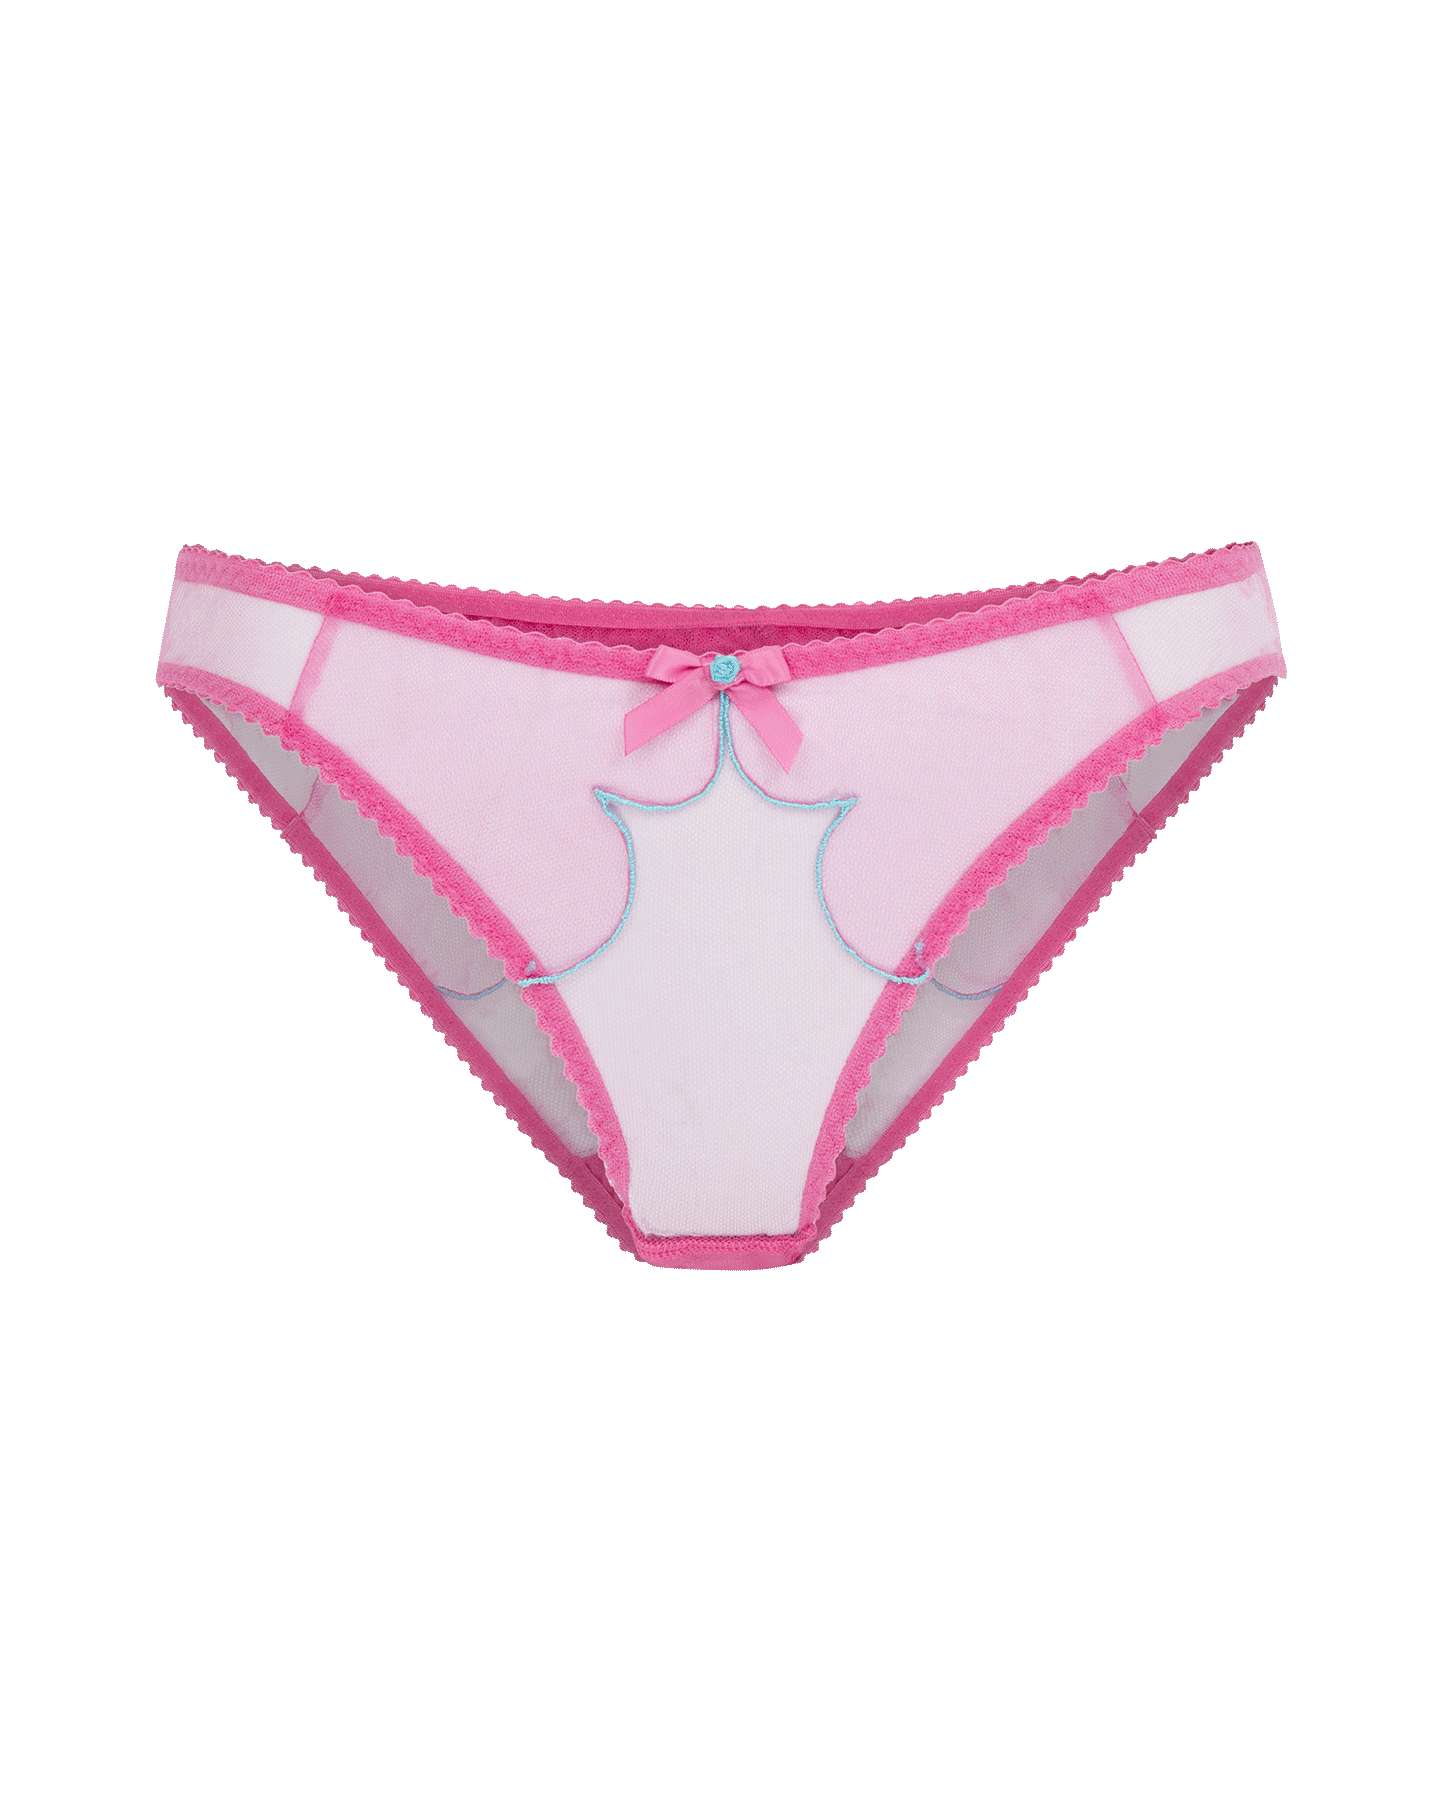 Lorna Full Brief in Hot Pink/Turquoise | By Agent Provocateur Outlet